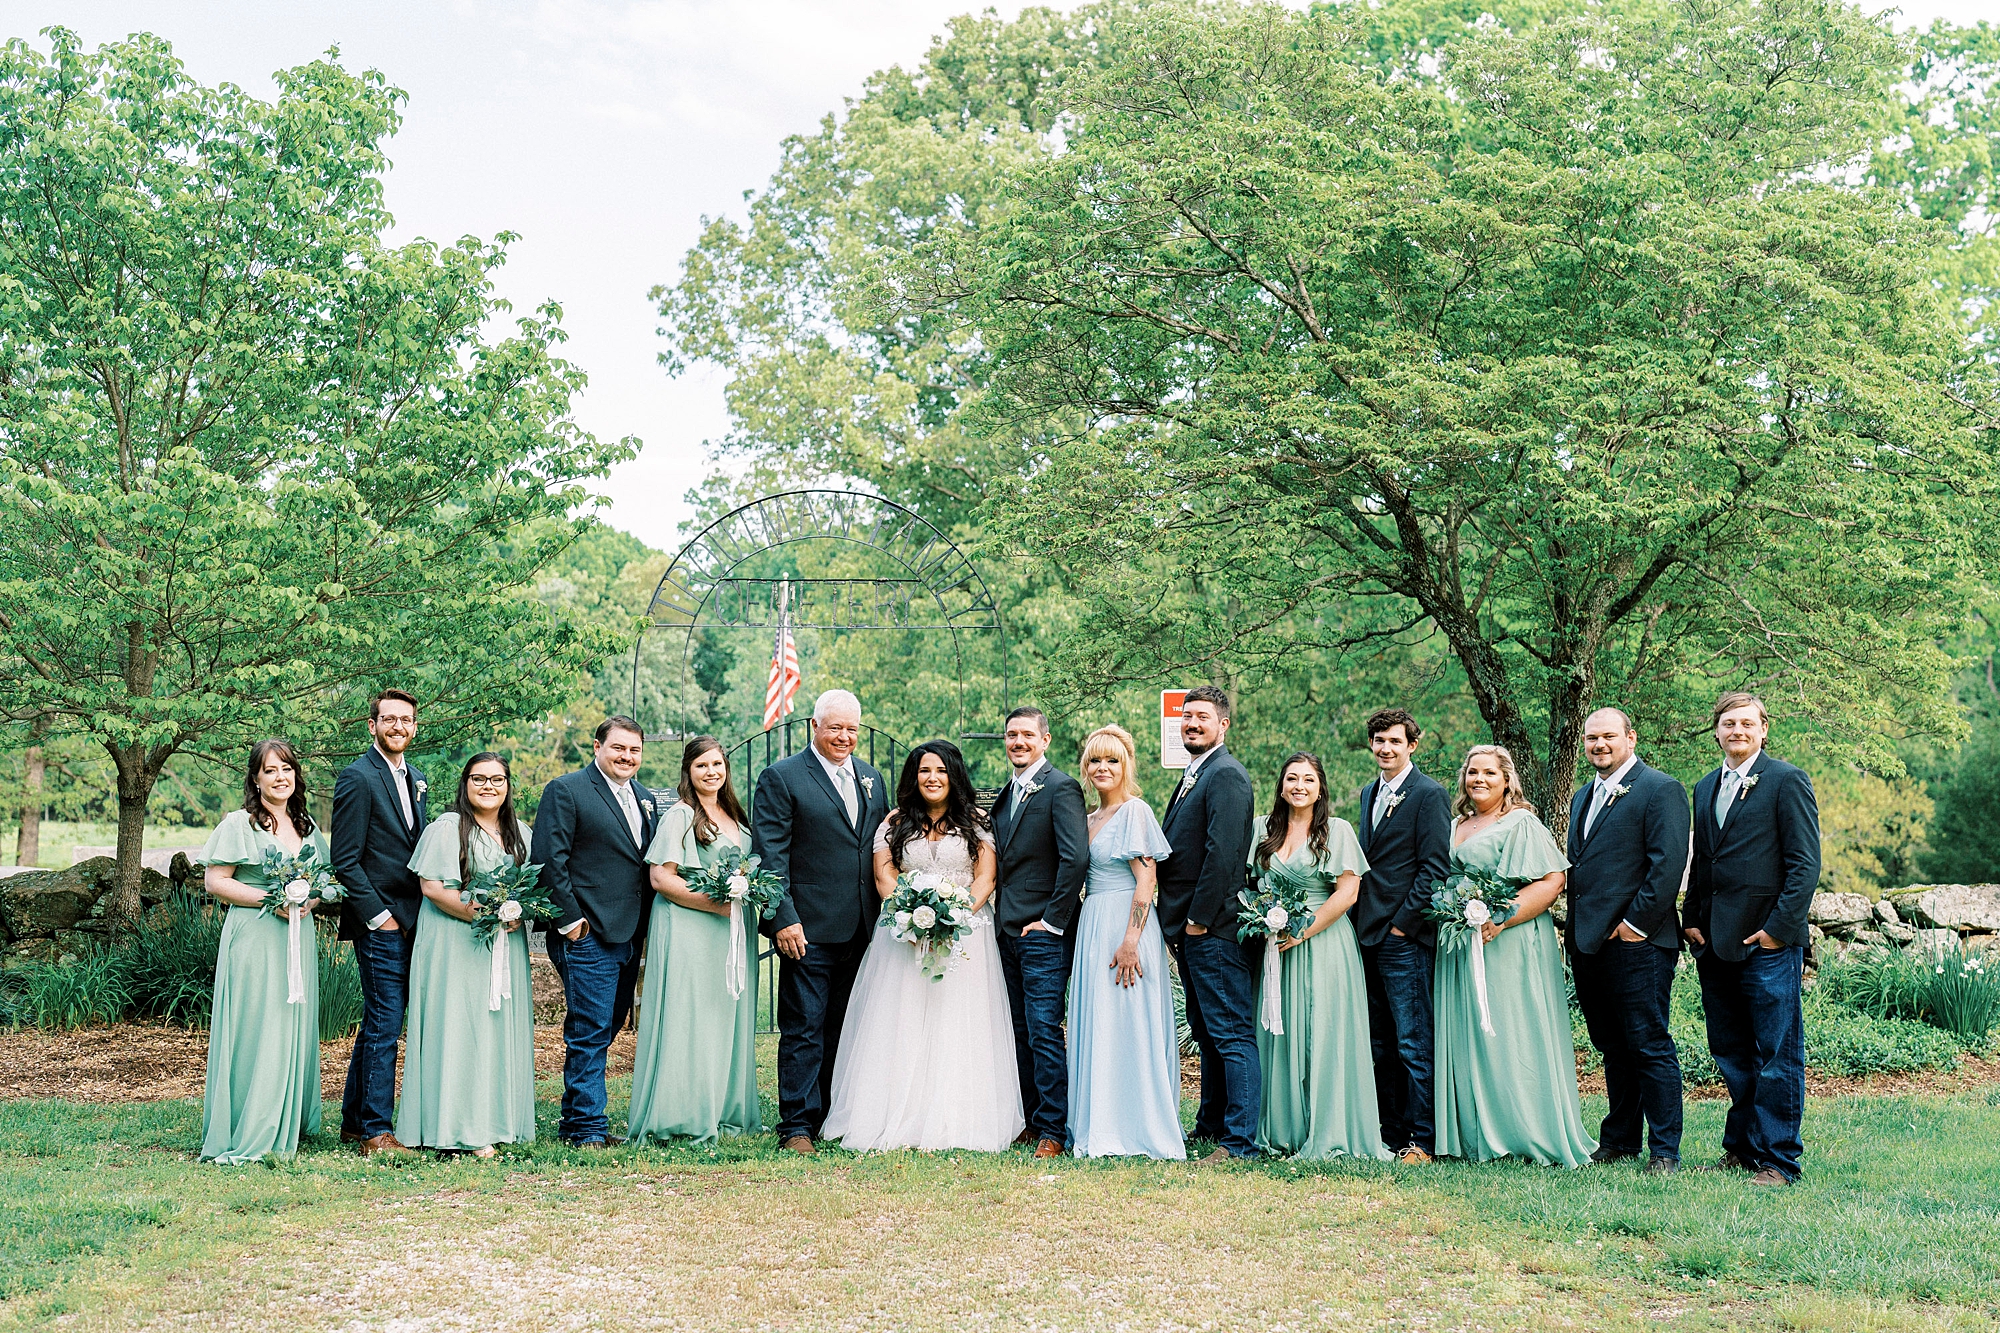 newlyweds stand with wedding party in mint and navy attire